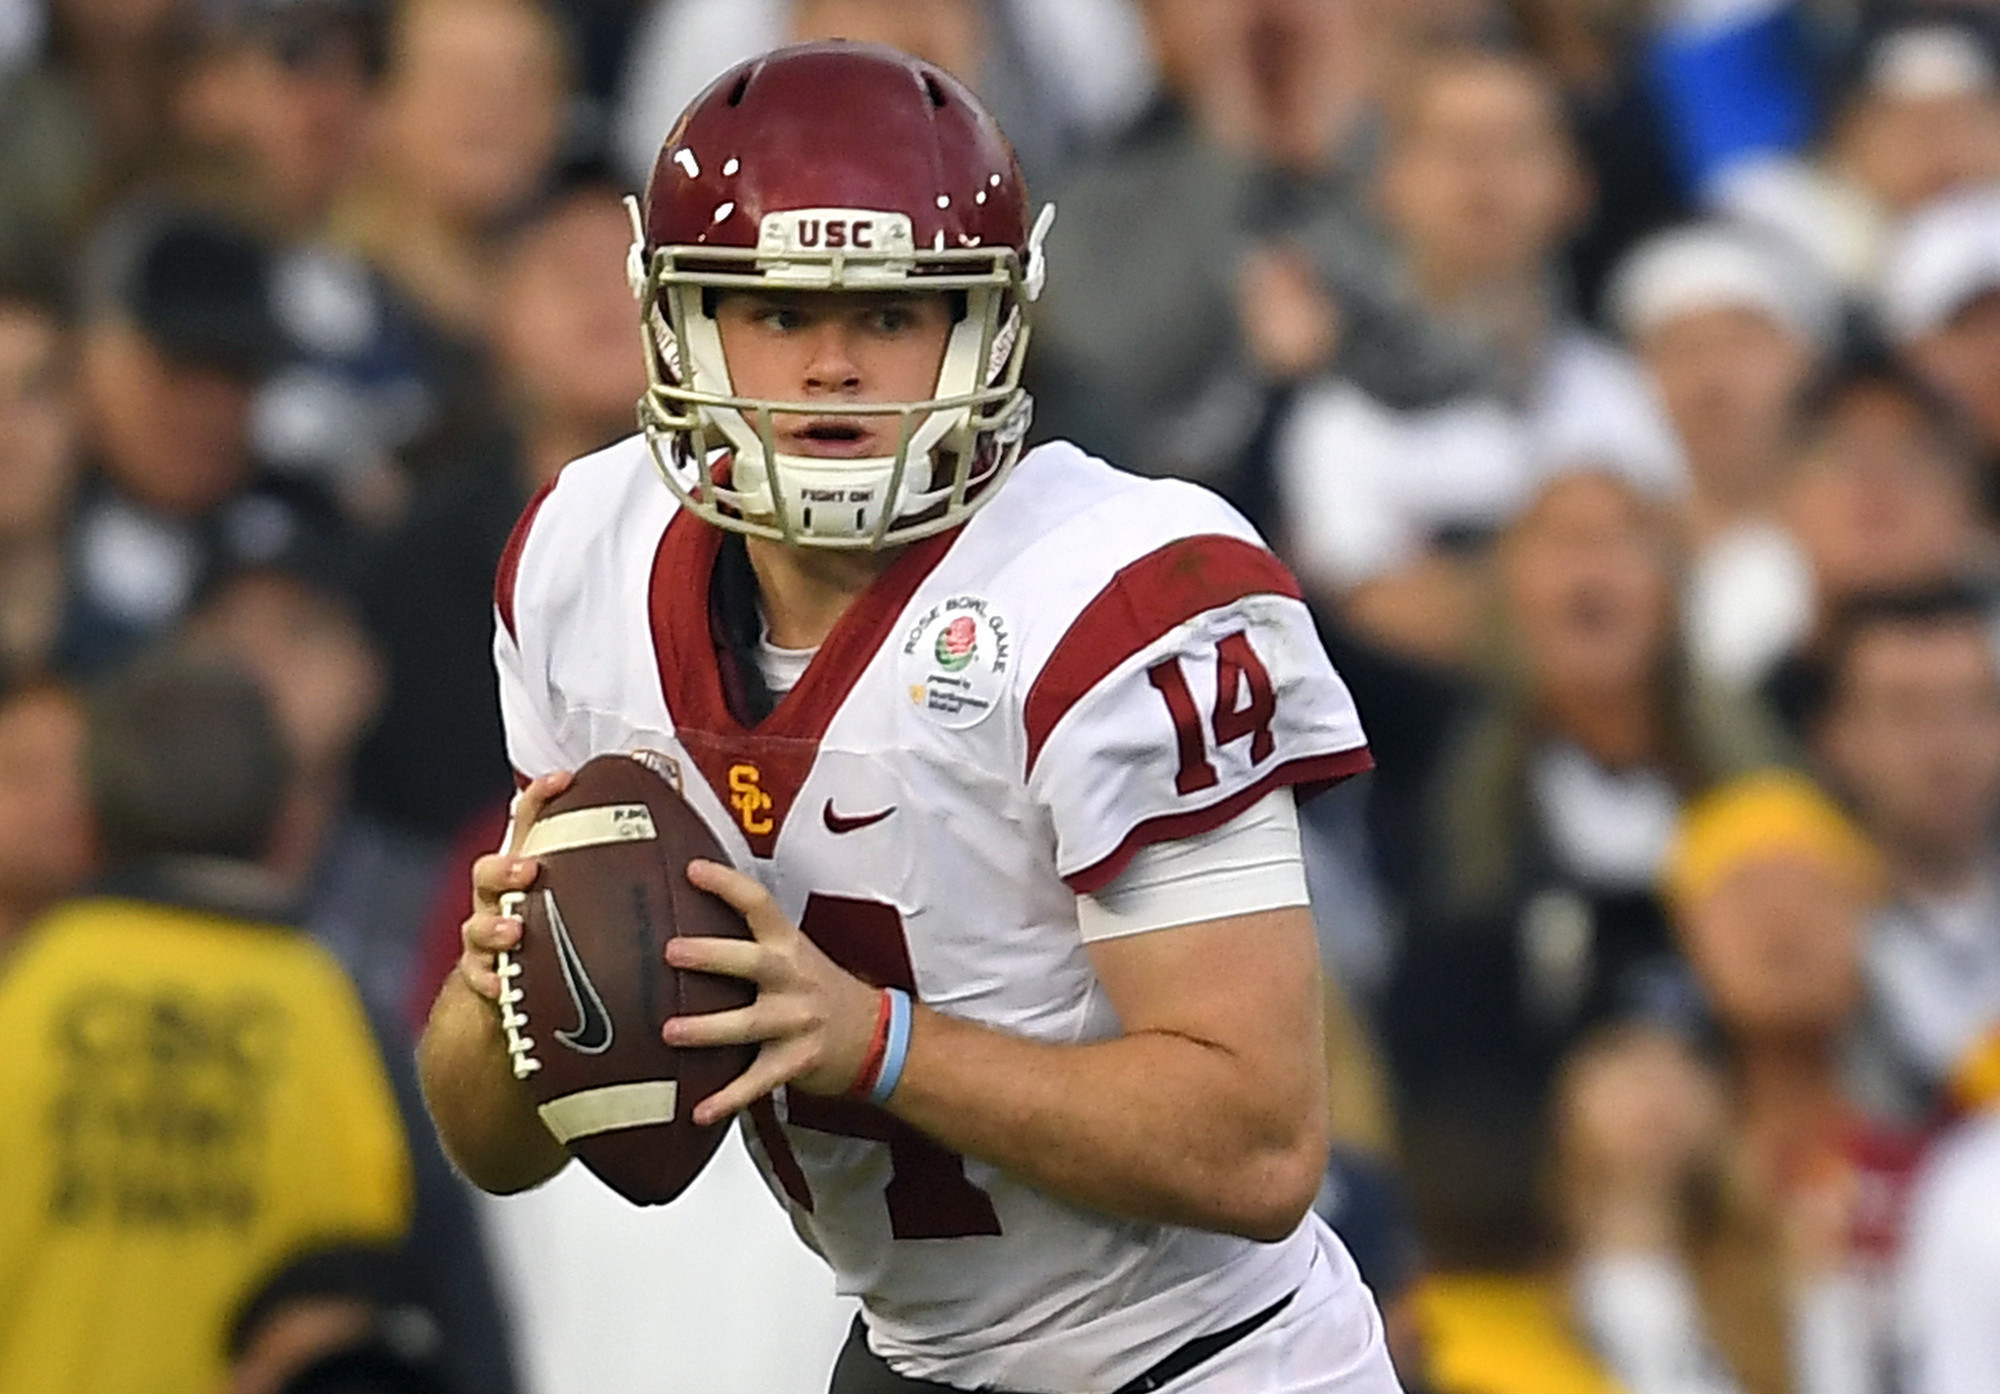 USC's football schedule contains no bye week for first time since 1995